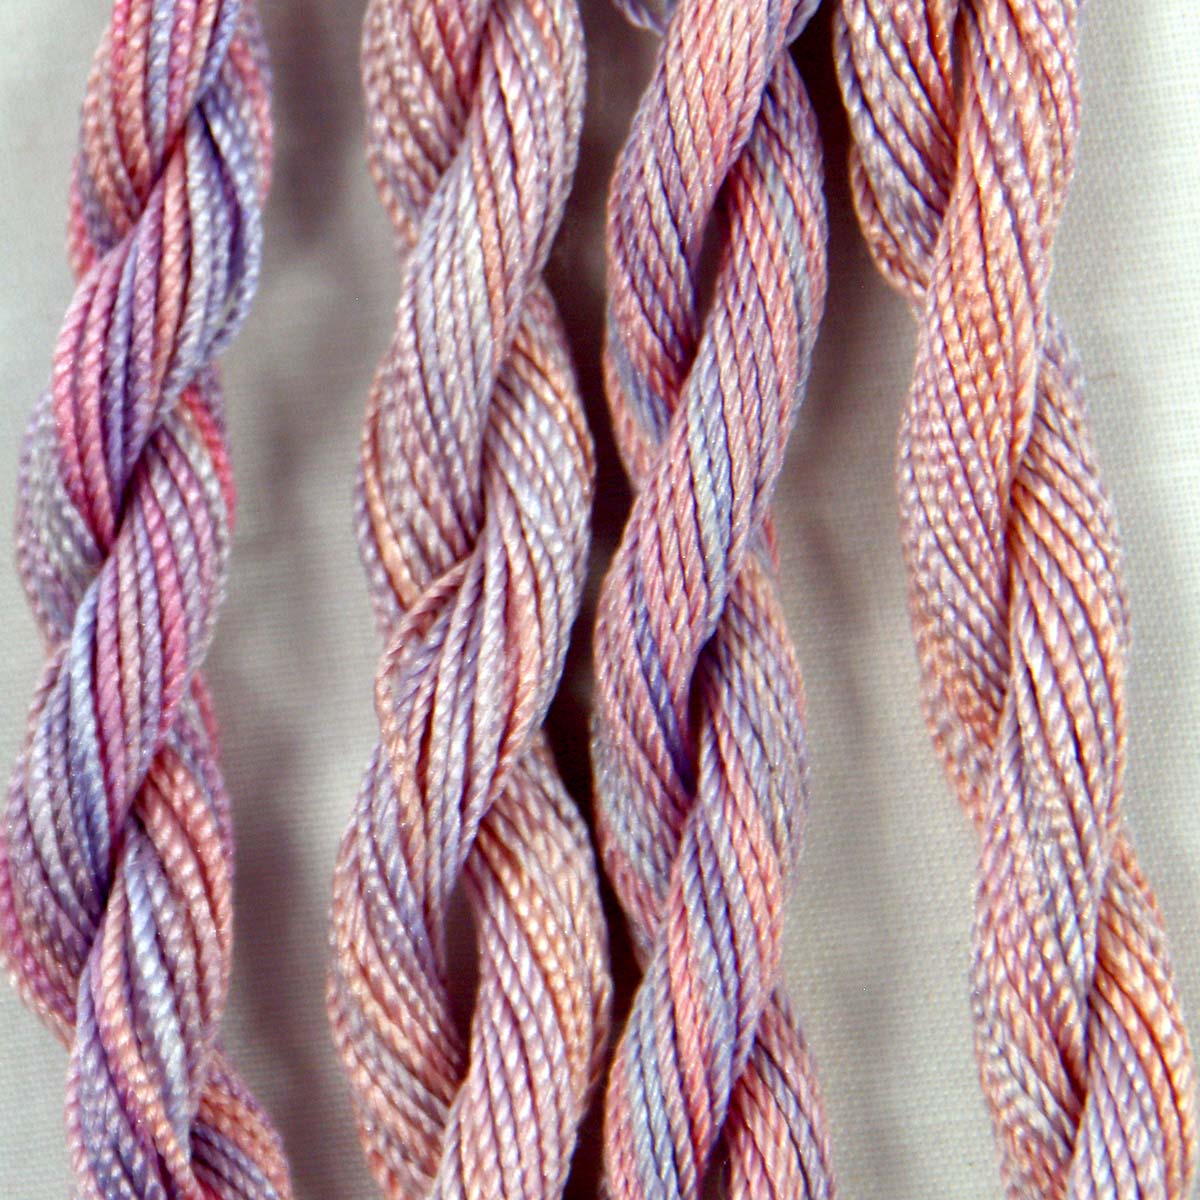 www.colourstreams.com.au Colour Streams Hand Dyed Silk Threads Silken Strands Ophir Exotic Lights Slow Stitch Embroidery Textile Arts Fibre DL Musk Rose Purples Pinks